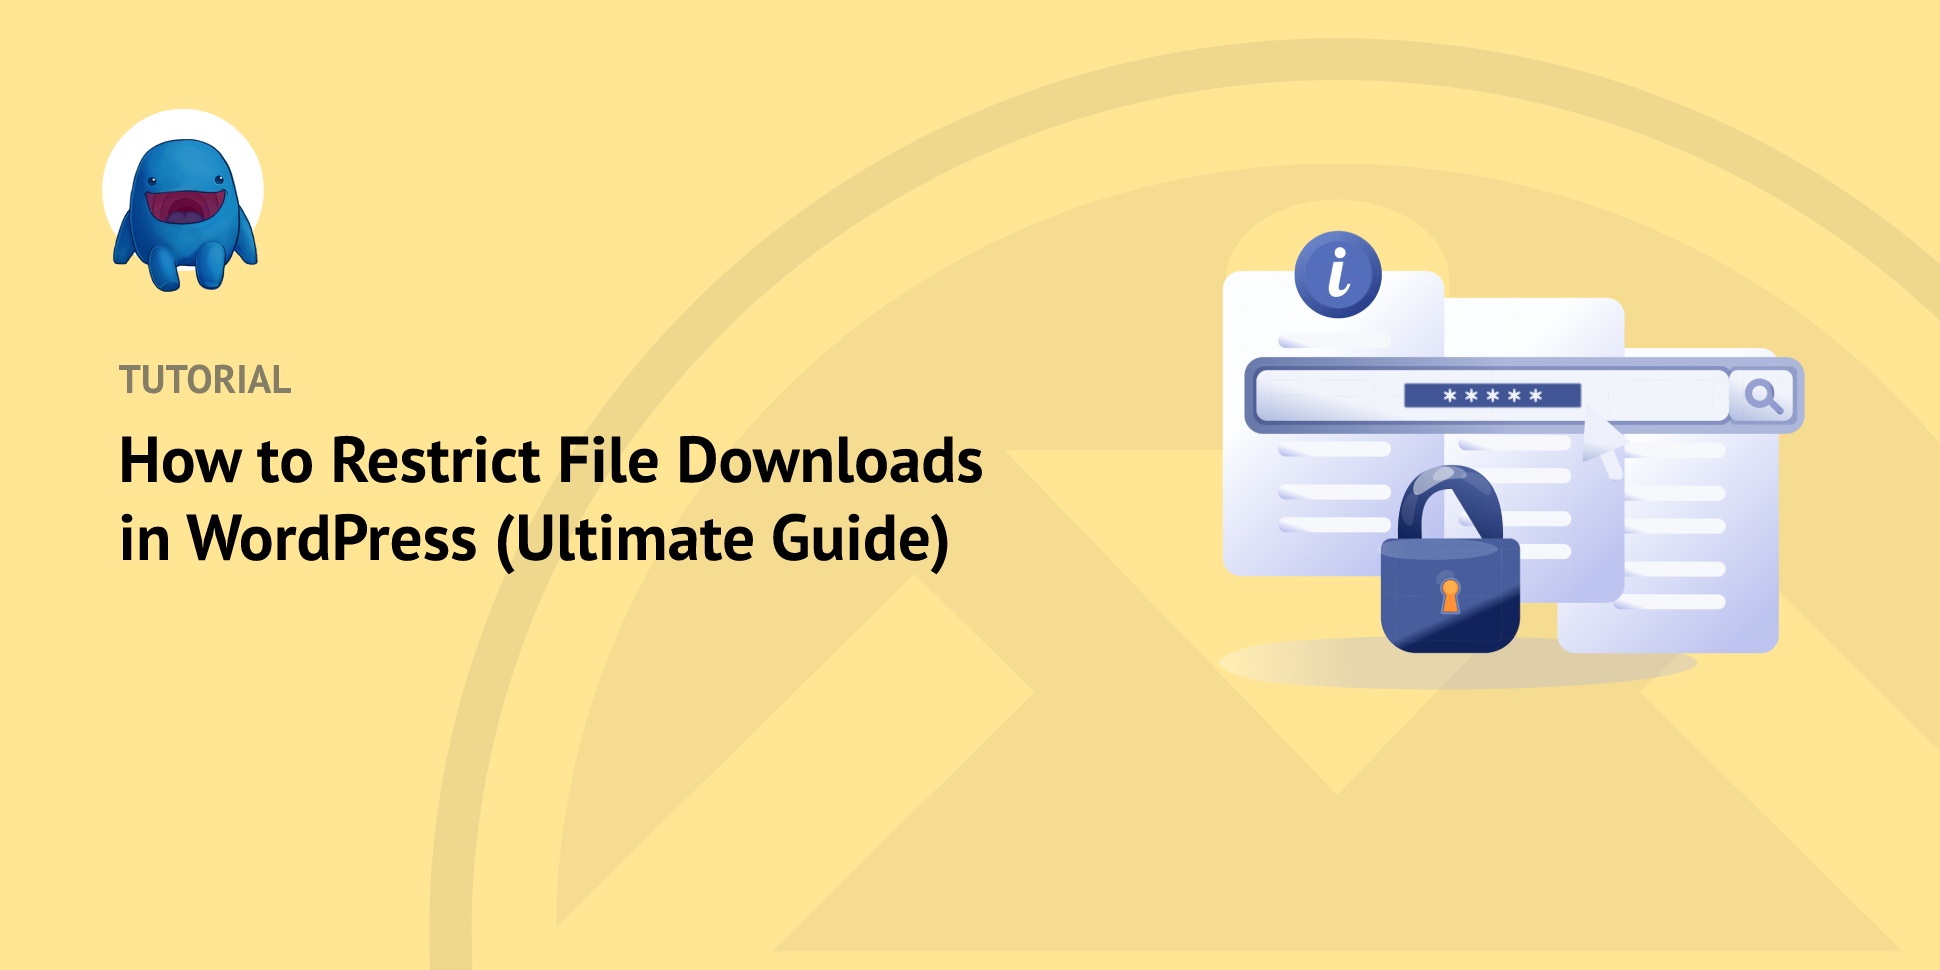 How to Restrict File Downloads in WordPress